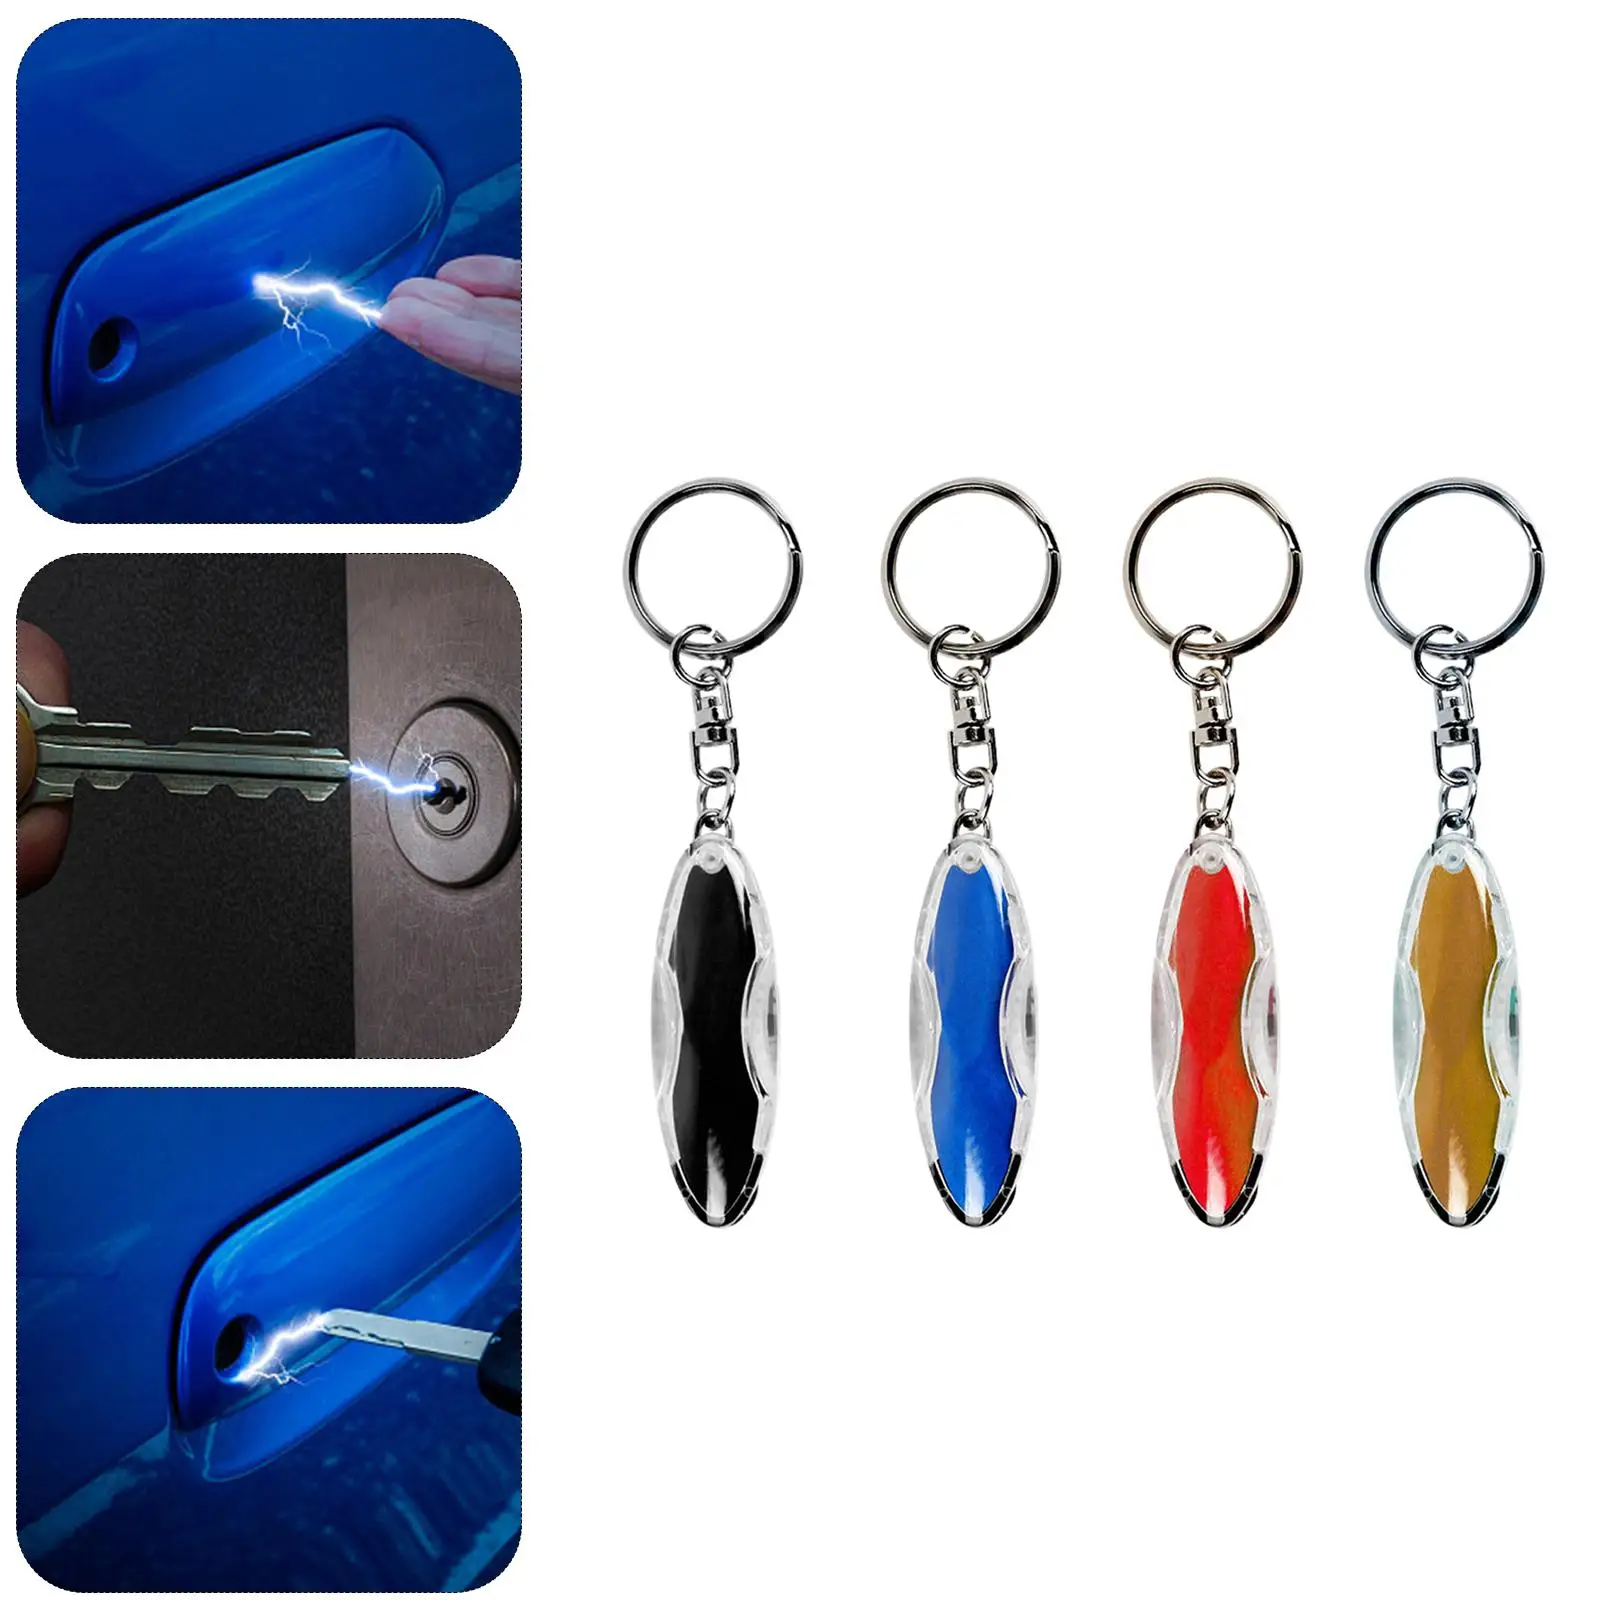 Portable Mini Anti Static Keychain, Keyring Human Body Car Static Car Static Discharge Remover Releaser for Auto